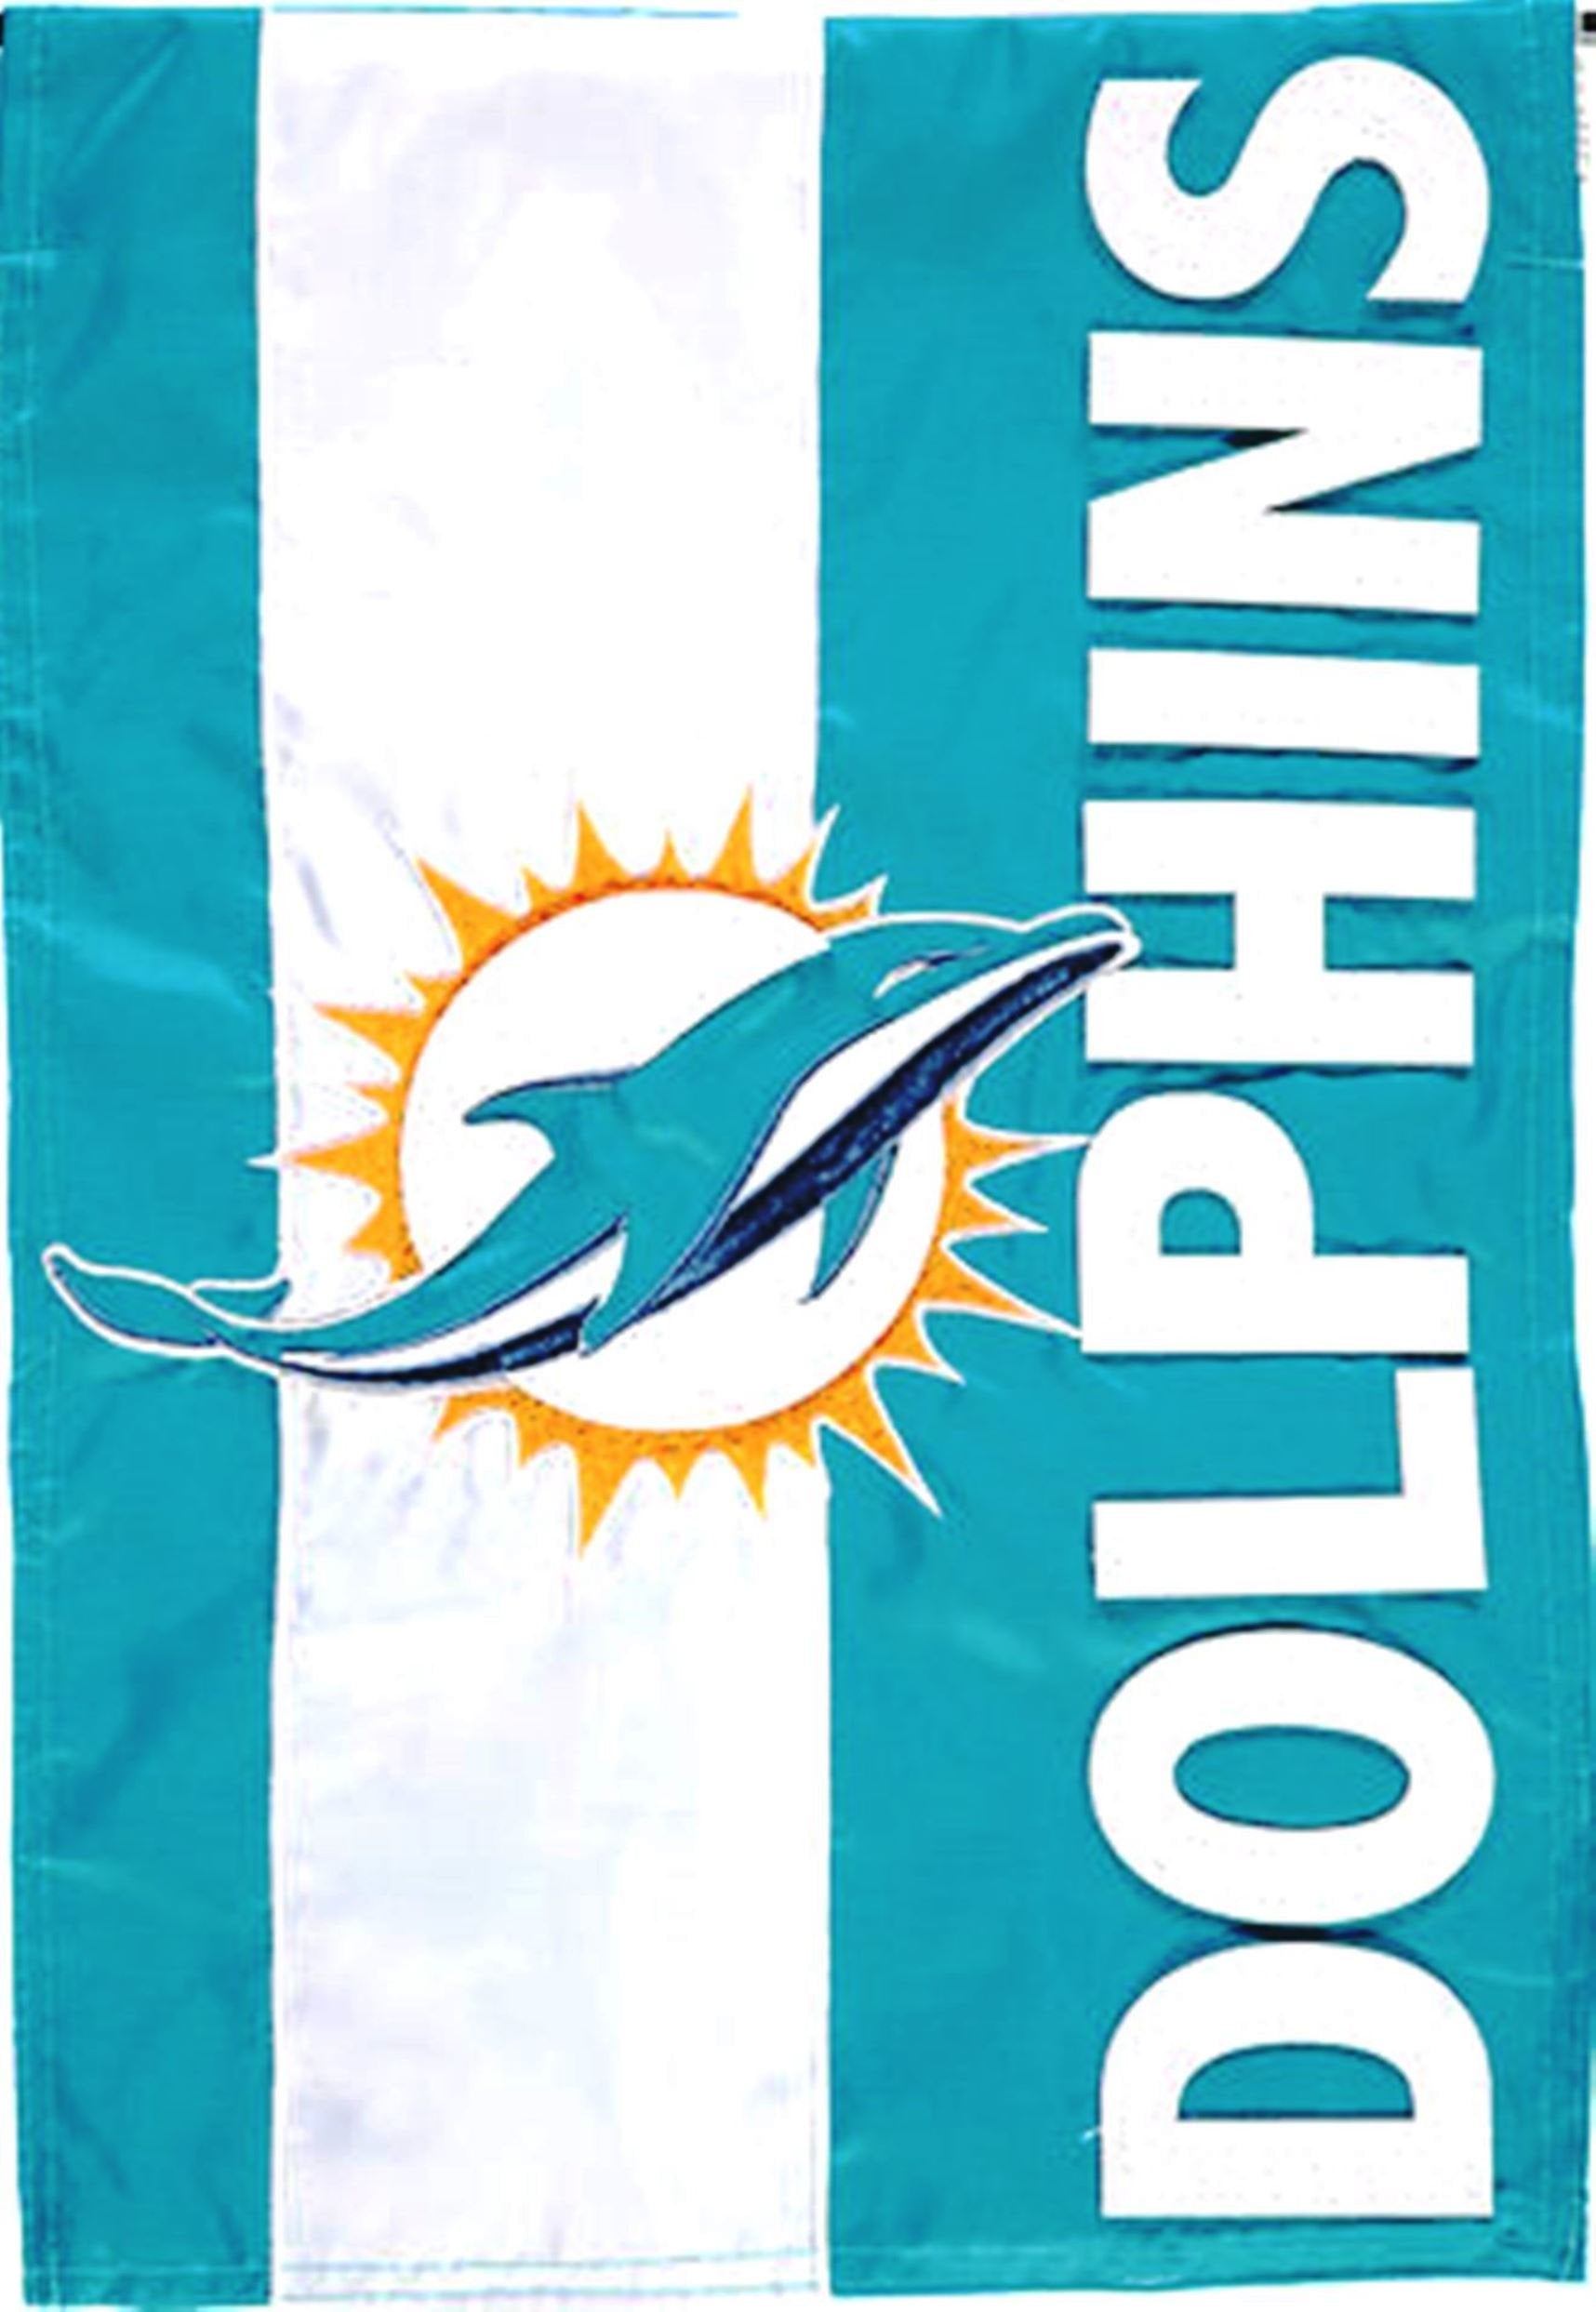 Miami Dolphins Premium Garden Flag Banner, Double Sided, Embroidered Applique, 13x18 Inch